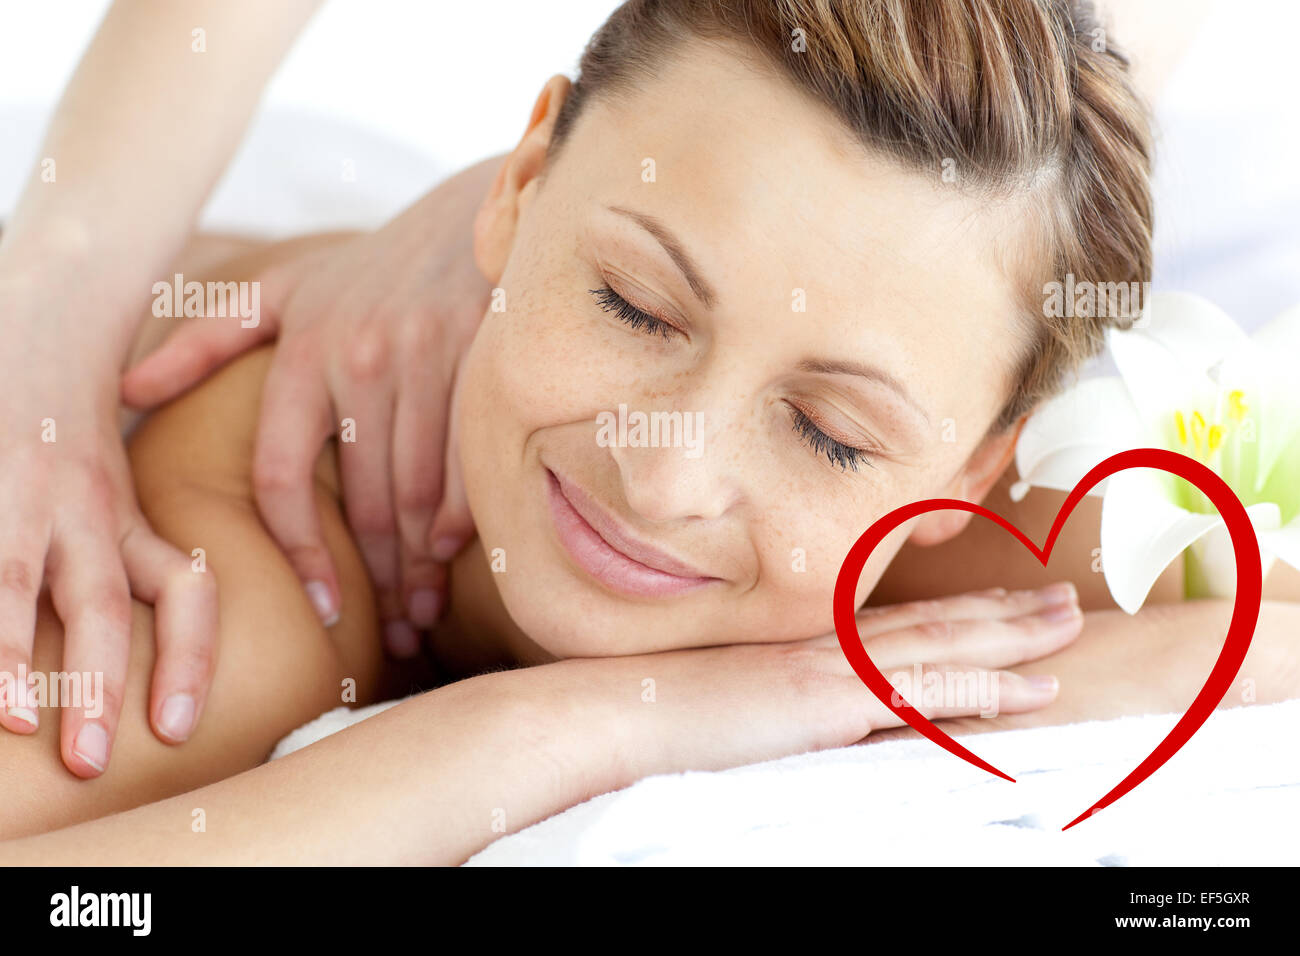 Composite image of young woman enjoying a back massage Stock Photo